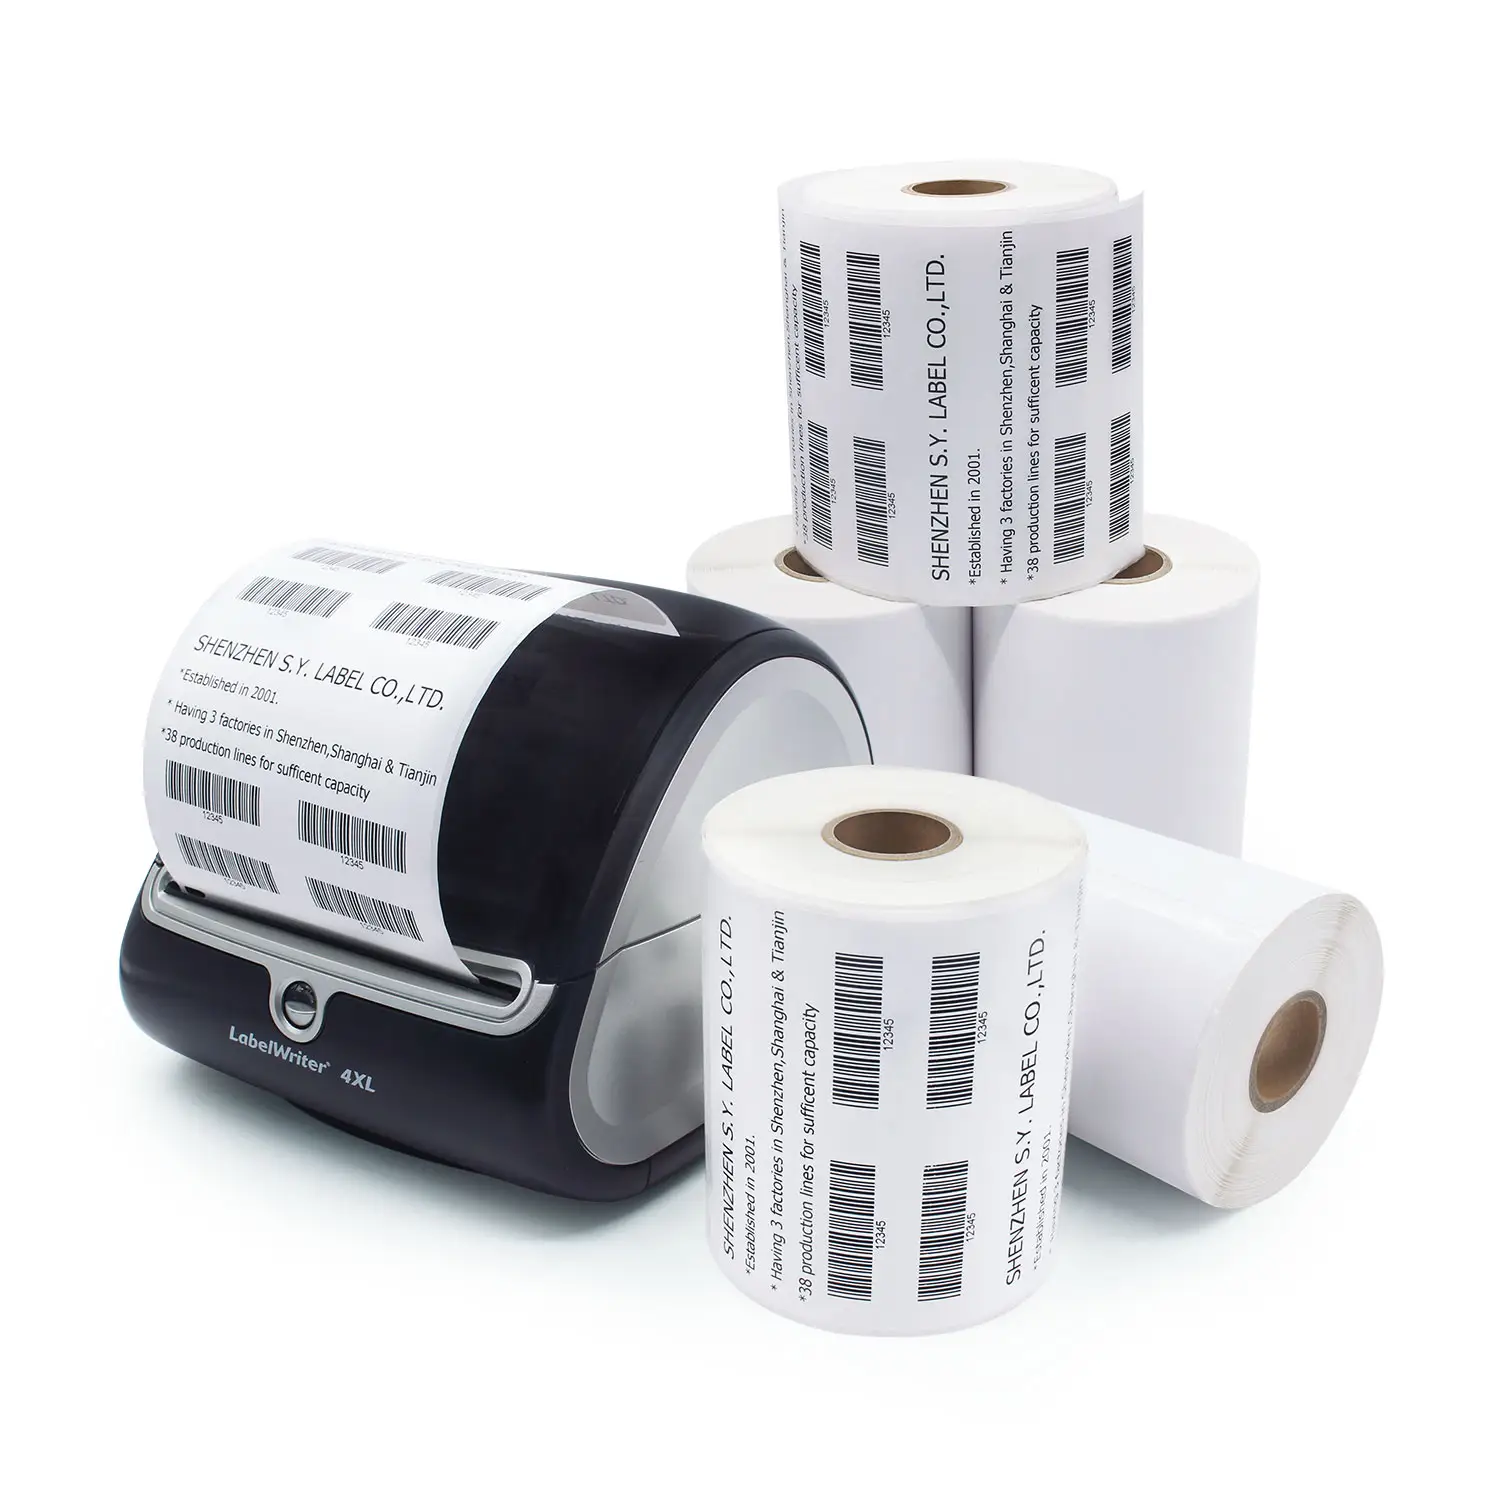 Factory Price 1744907 4x6 Waterproof Direct Thermal Roll Paper Blank Shipping Label Sticker for Dymo Printer